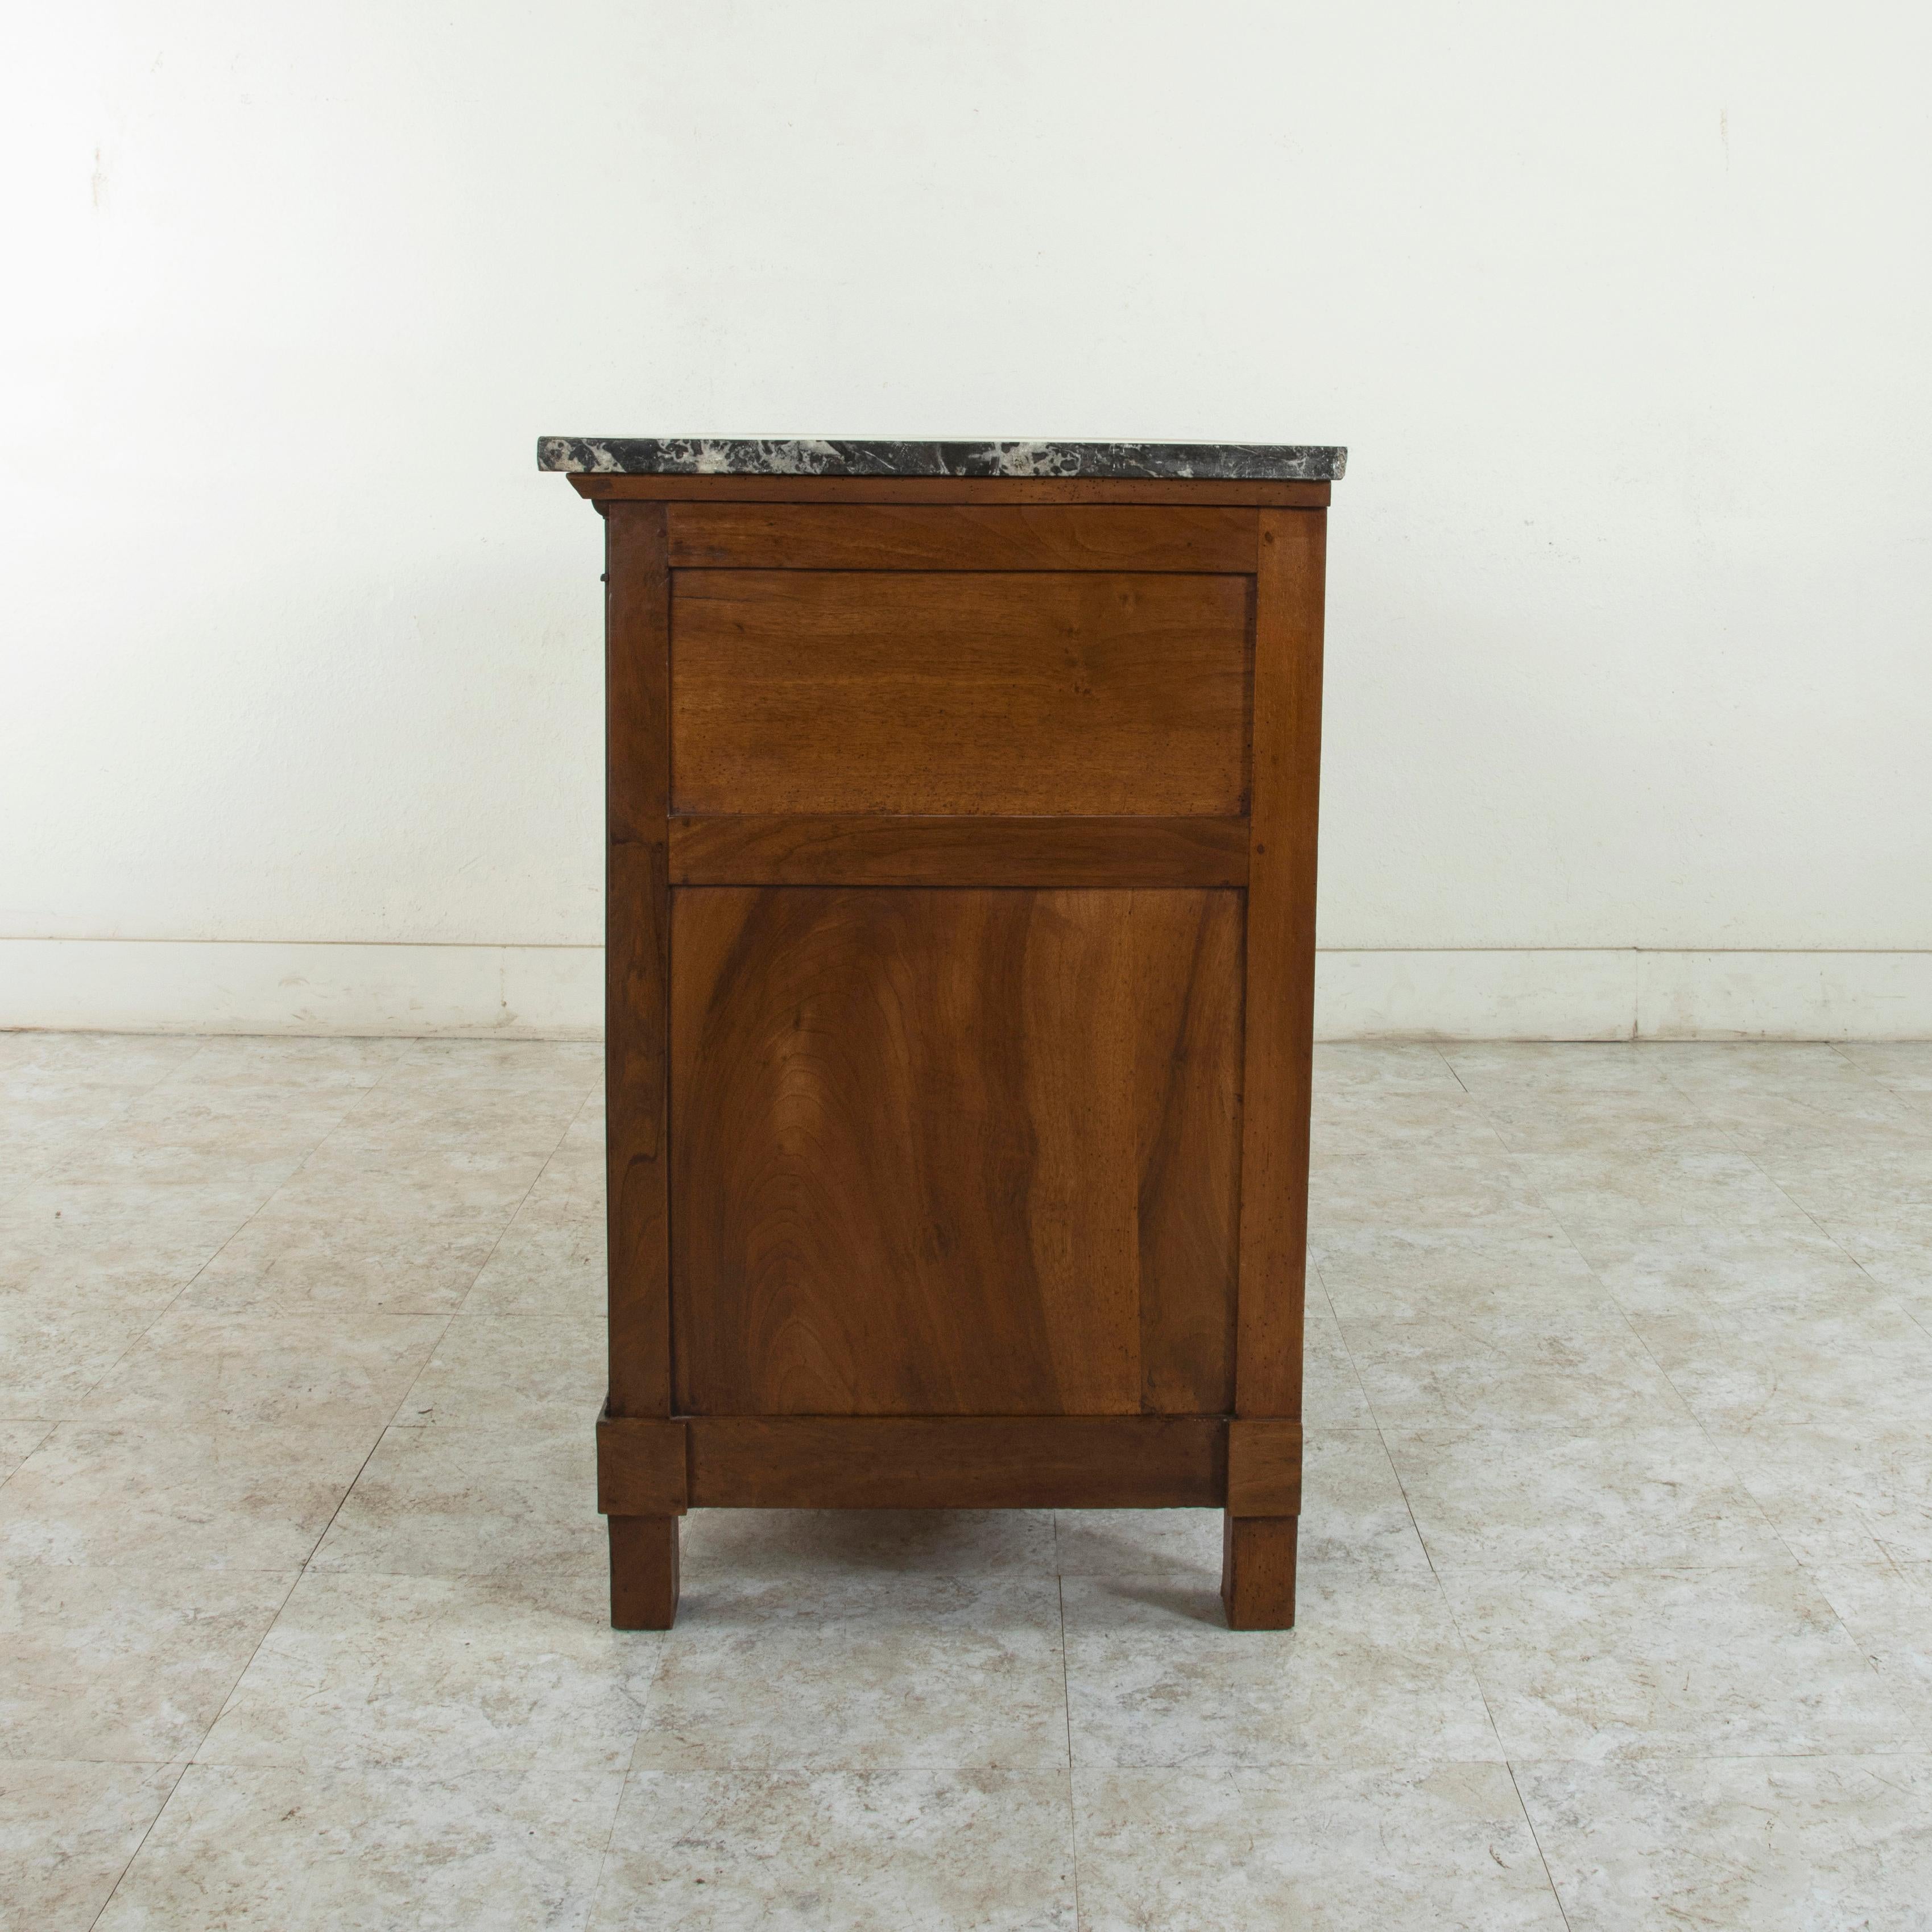 Early 19th Century French Restauration Period Walnut Commode, Chest, Marble Top (Marmor)